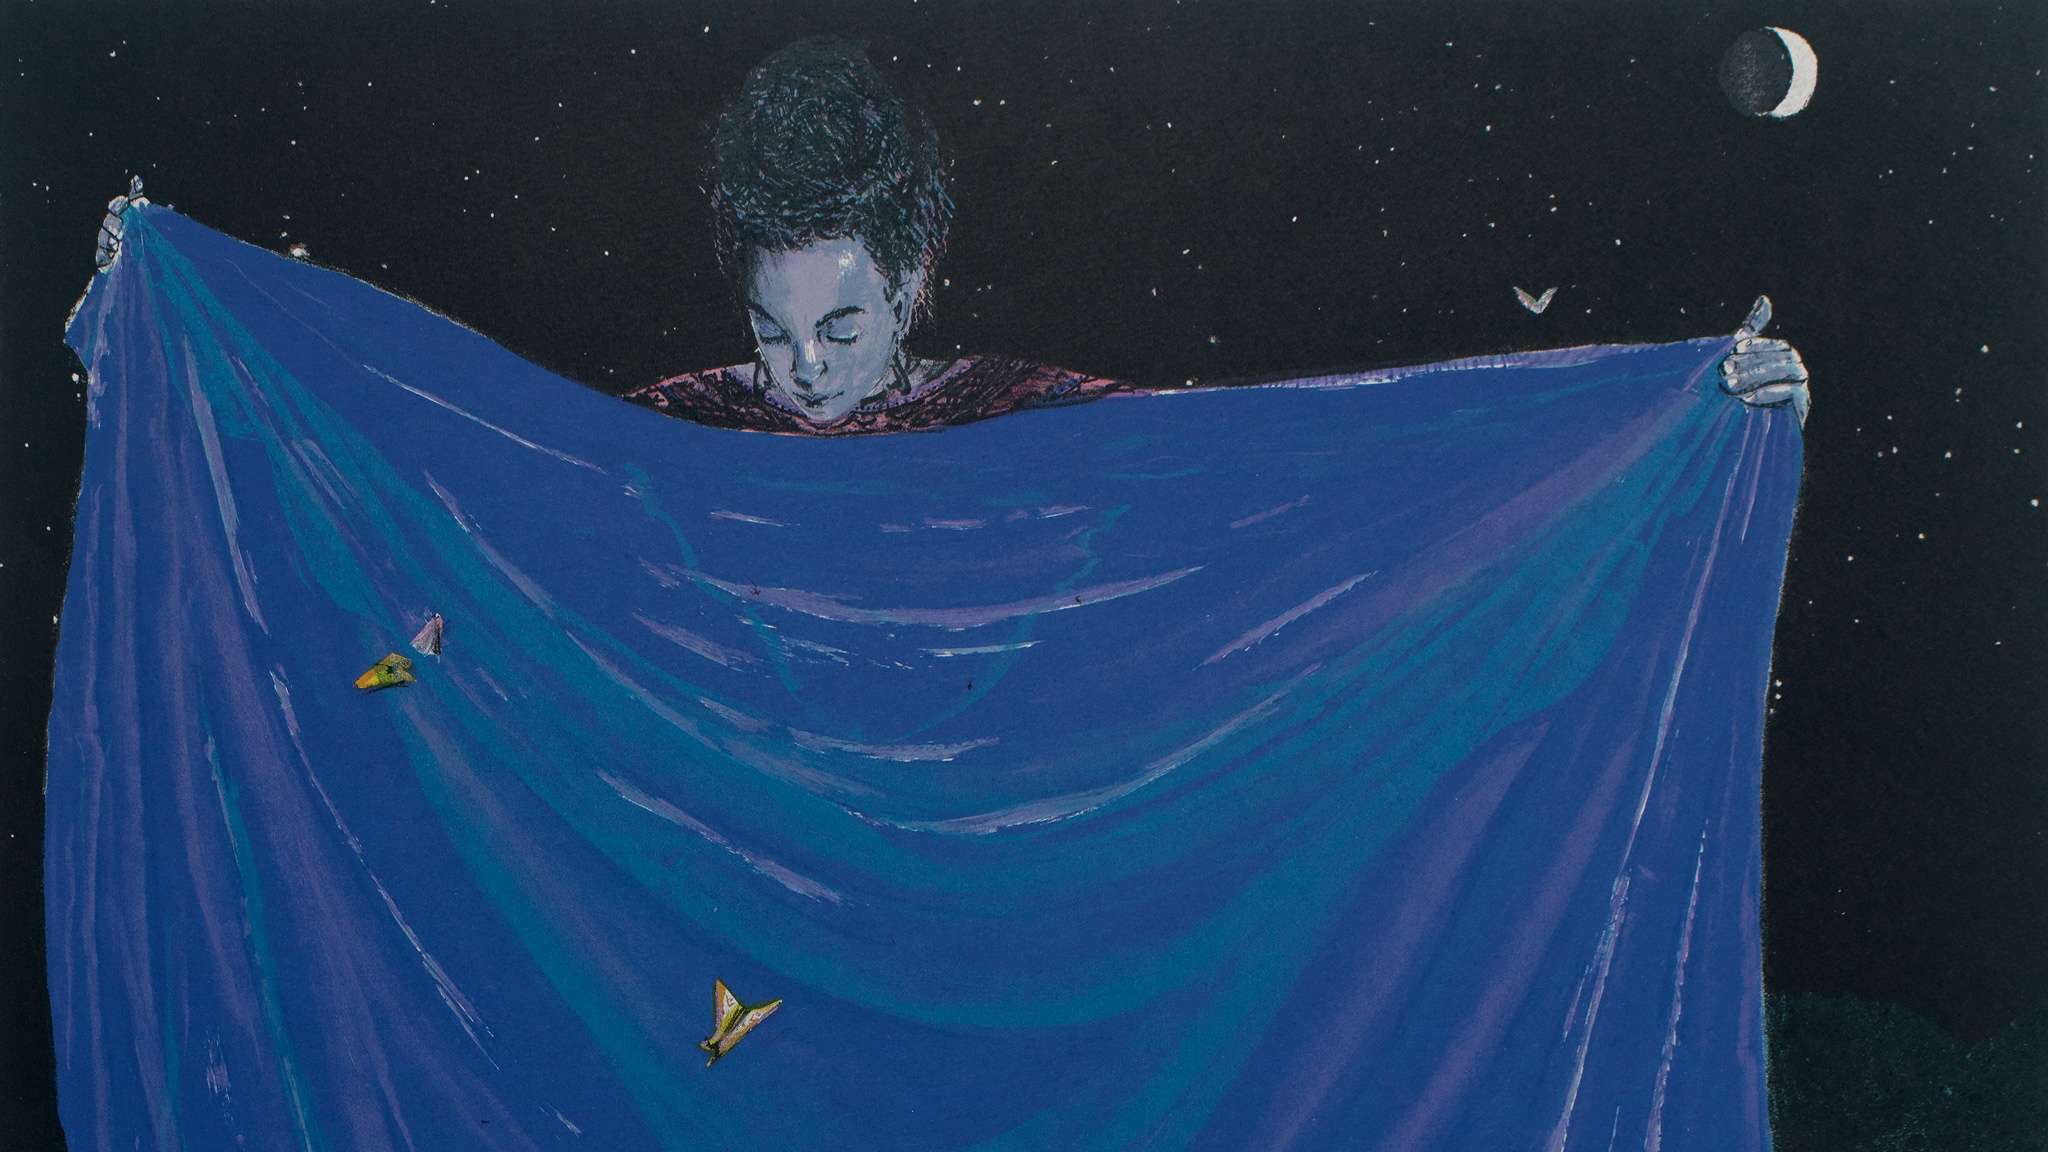 Against a background of the night sky and the moon, a woman with dark curly hair and blue-grey skin holds up a blue blanket decorated with yellow and pink butterflies.